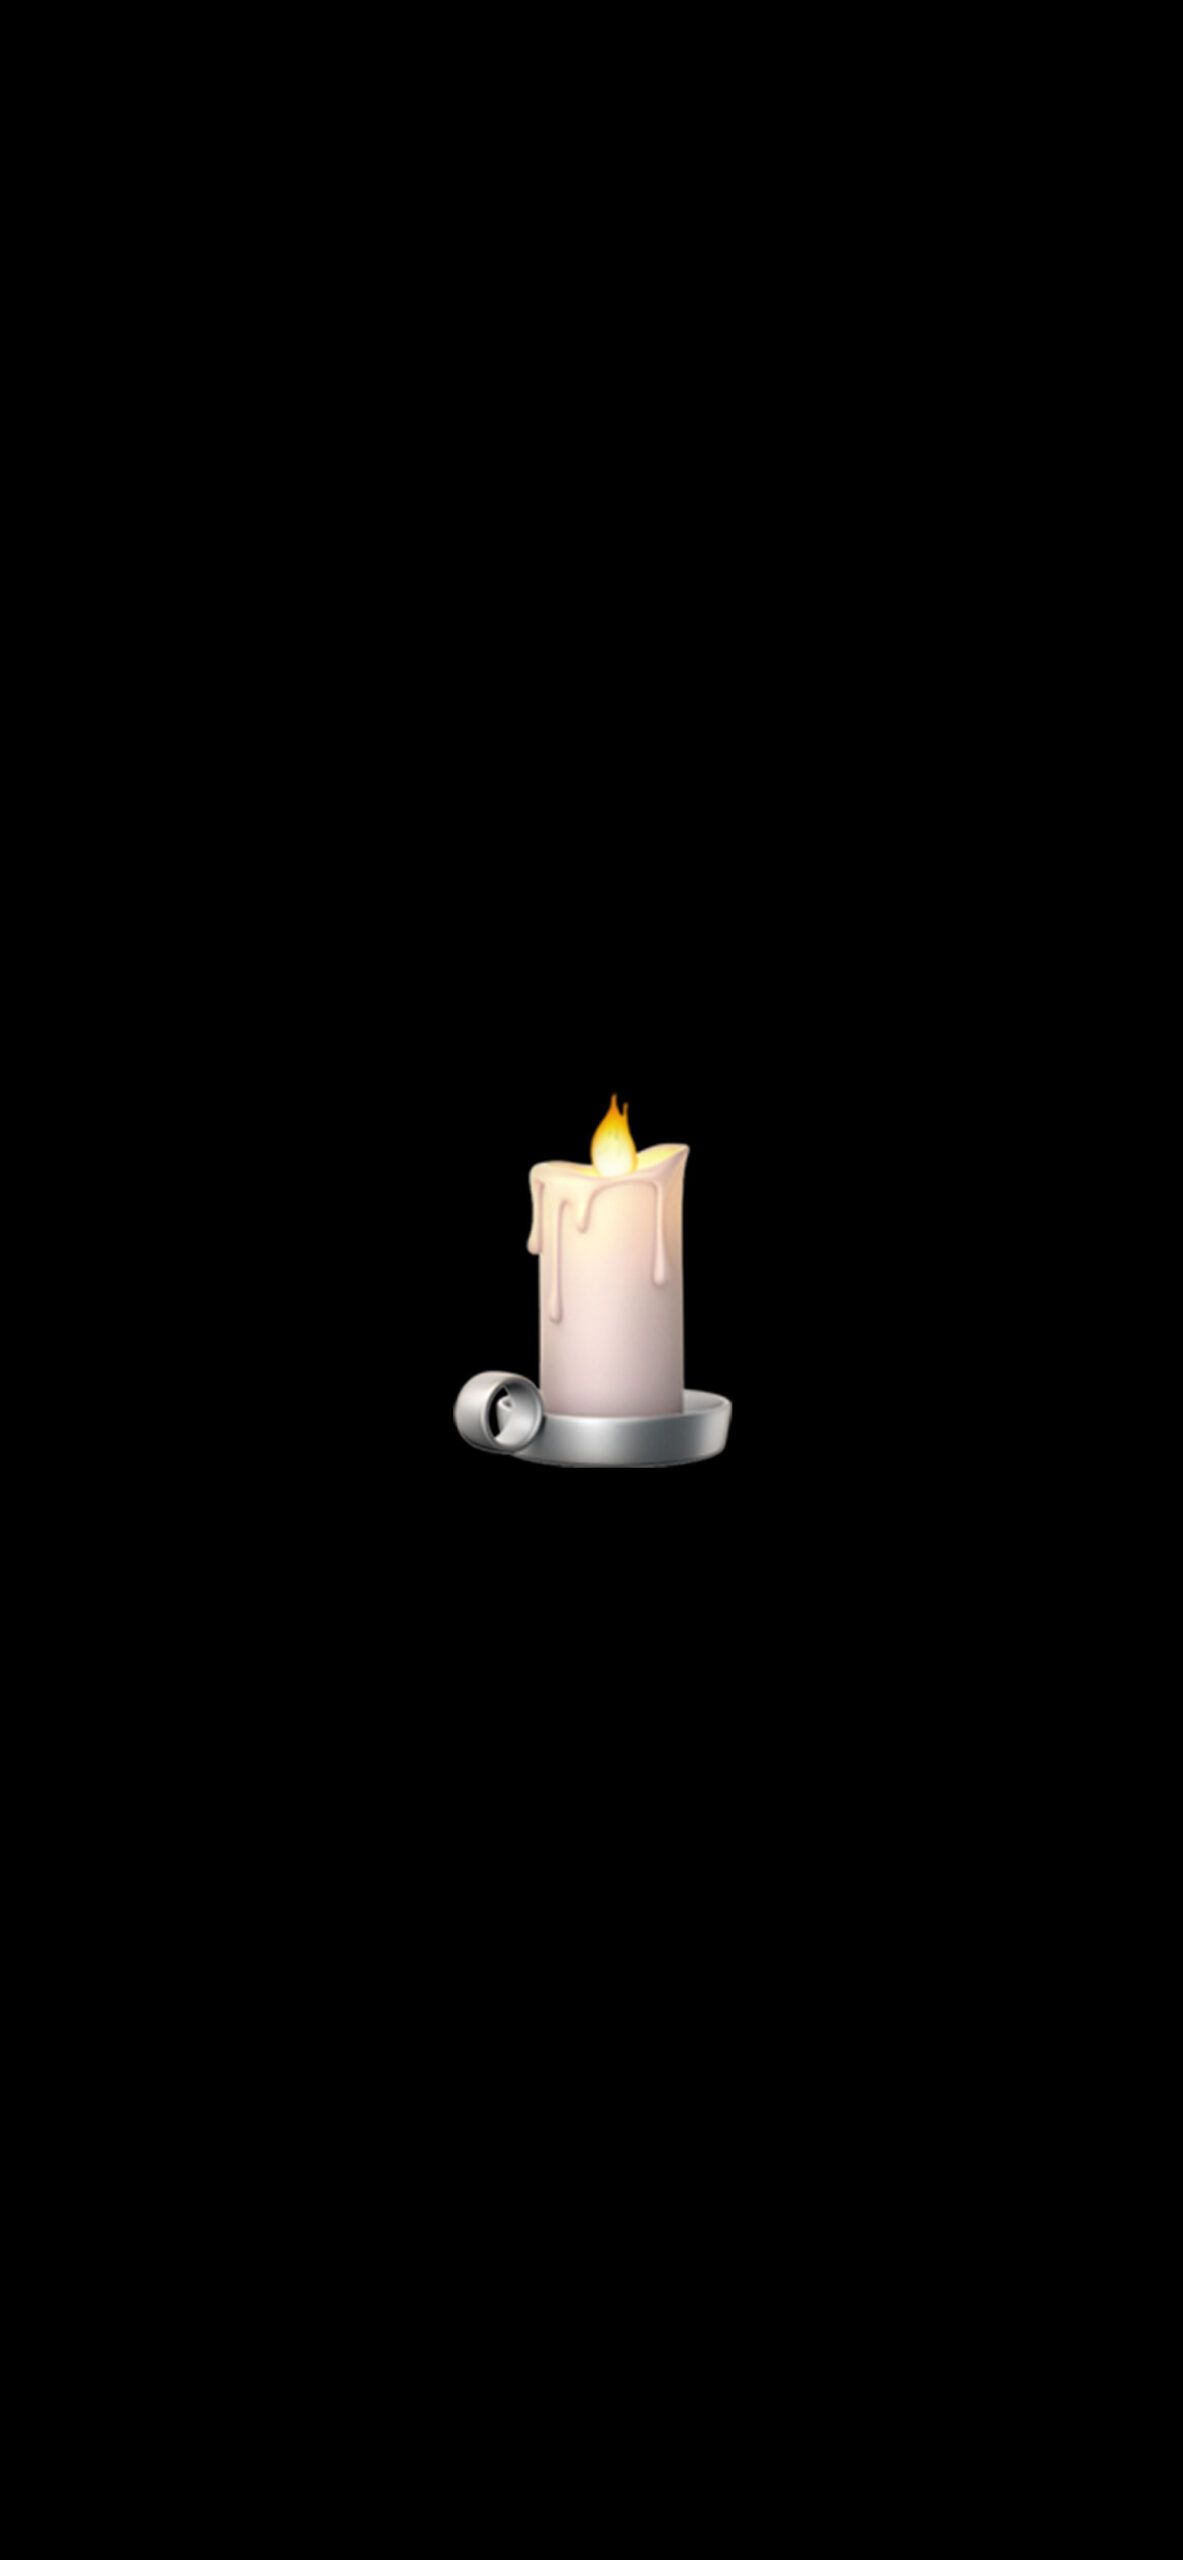 A candle burns on a black background. - Ghost